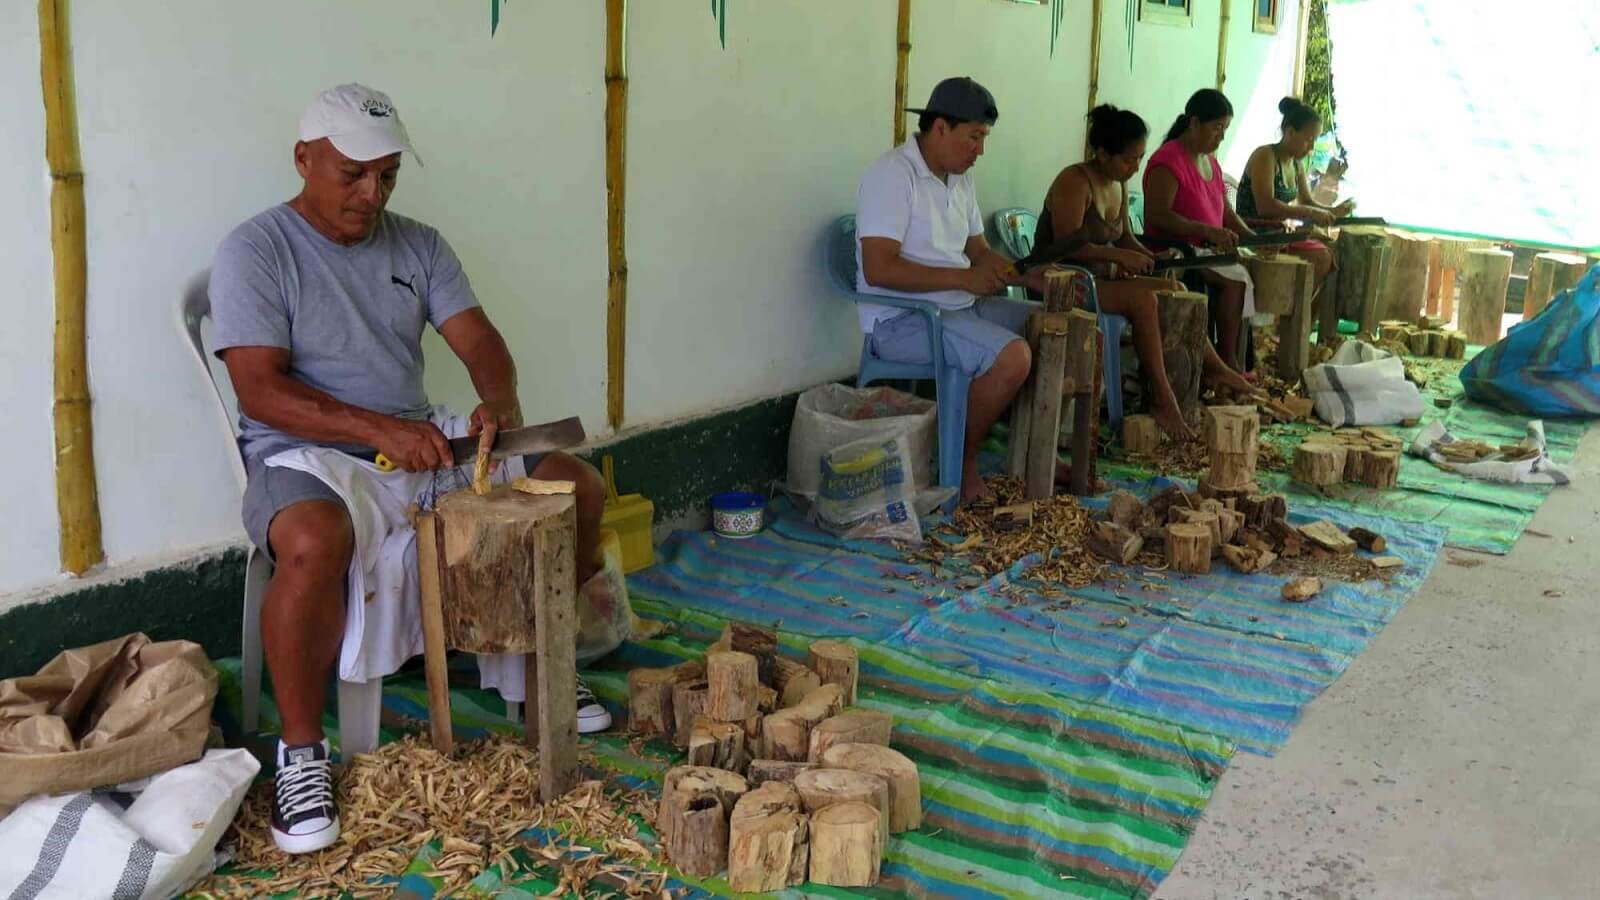 Local people preparing Palo Santo sticks for sales and export. See those specialists at work during your Palo Santo Factory Tour with Impactful Travel in Ecuador.